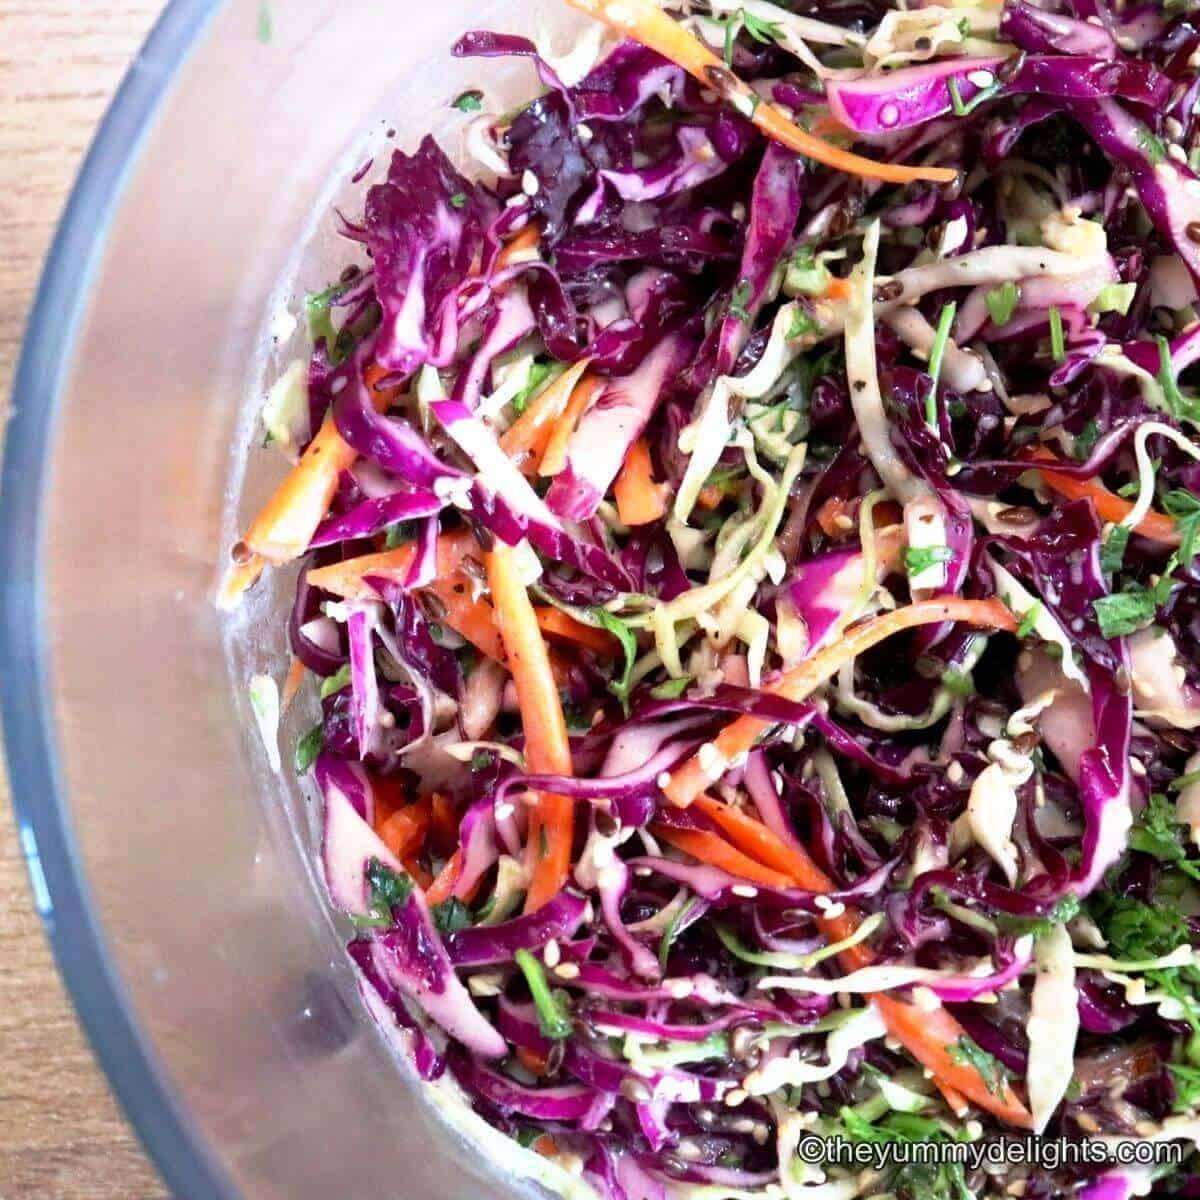 Greek yogurt coleslaw recipe in a mixing bowl. Side view of the coleslaw bowl with colorful vegetables.